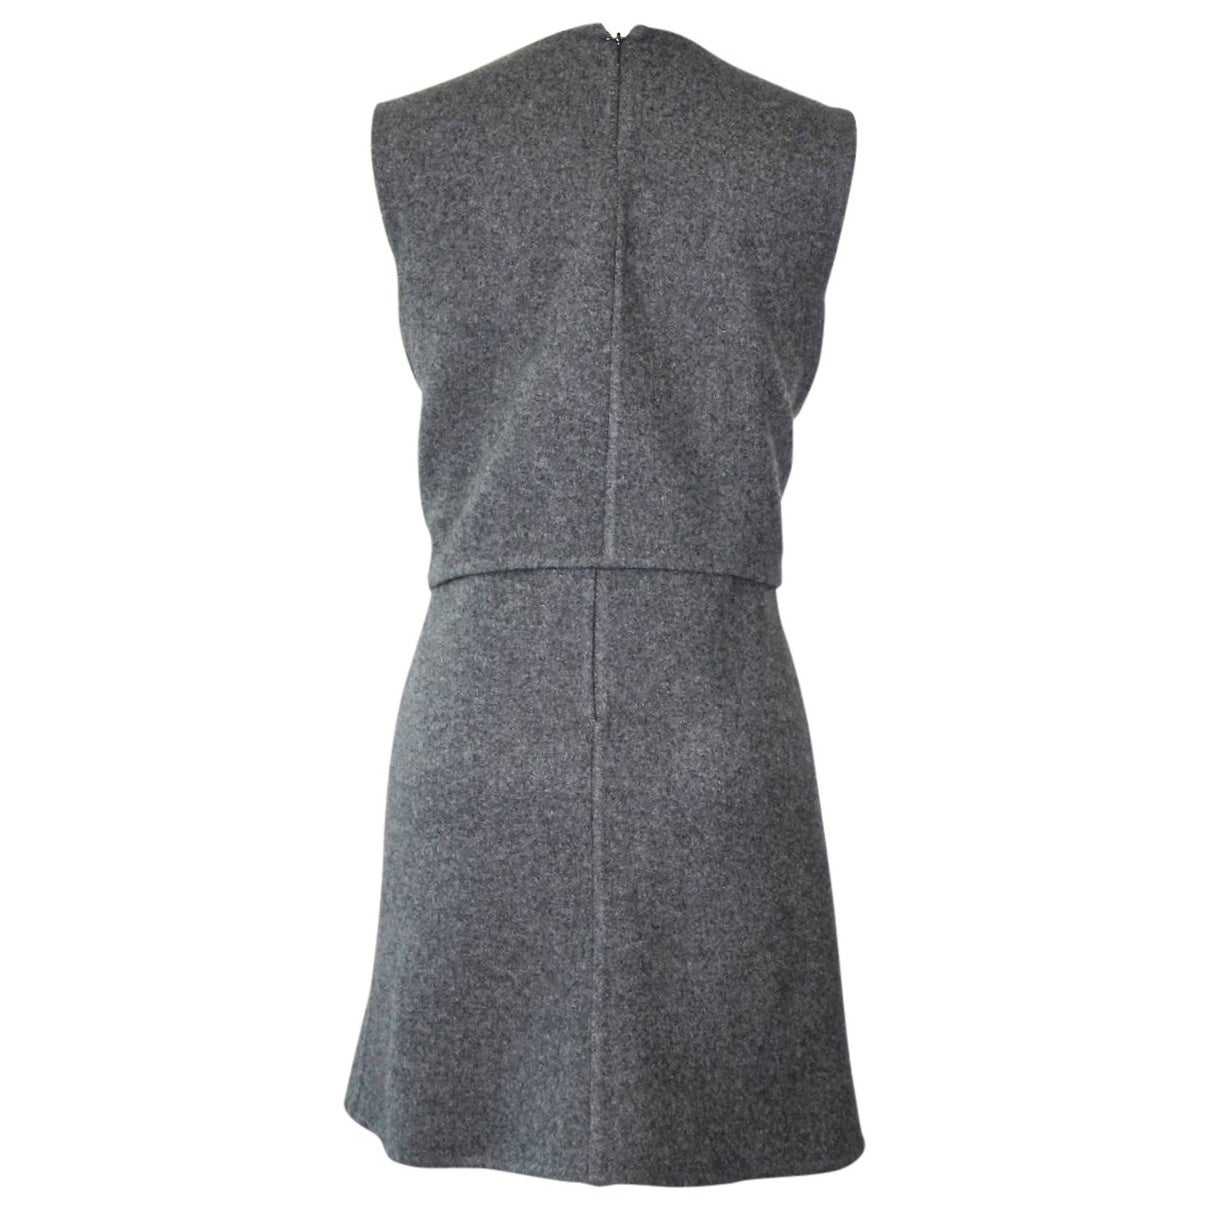 Women's CELINE grey cashmere runway dress with knotted 'sleeves' - fall 2013